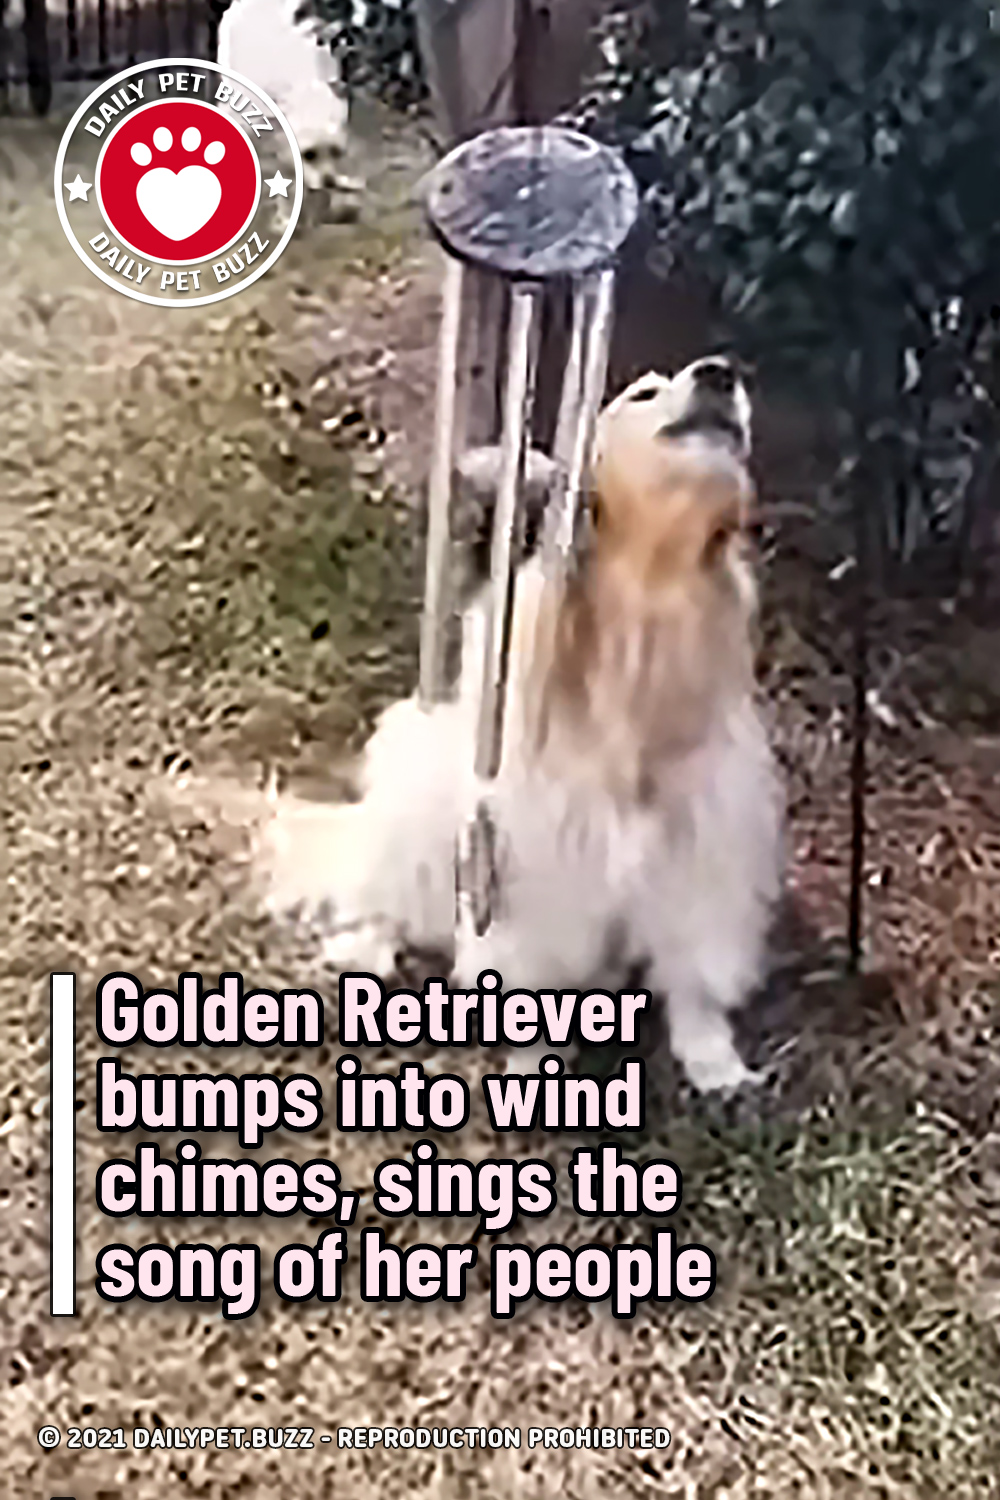 Golden Retriever bumps into wind chimes, sings the song of her people